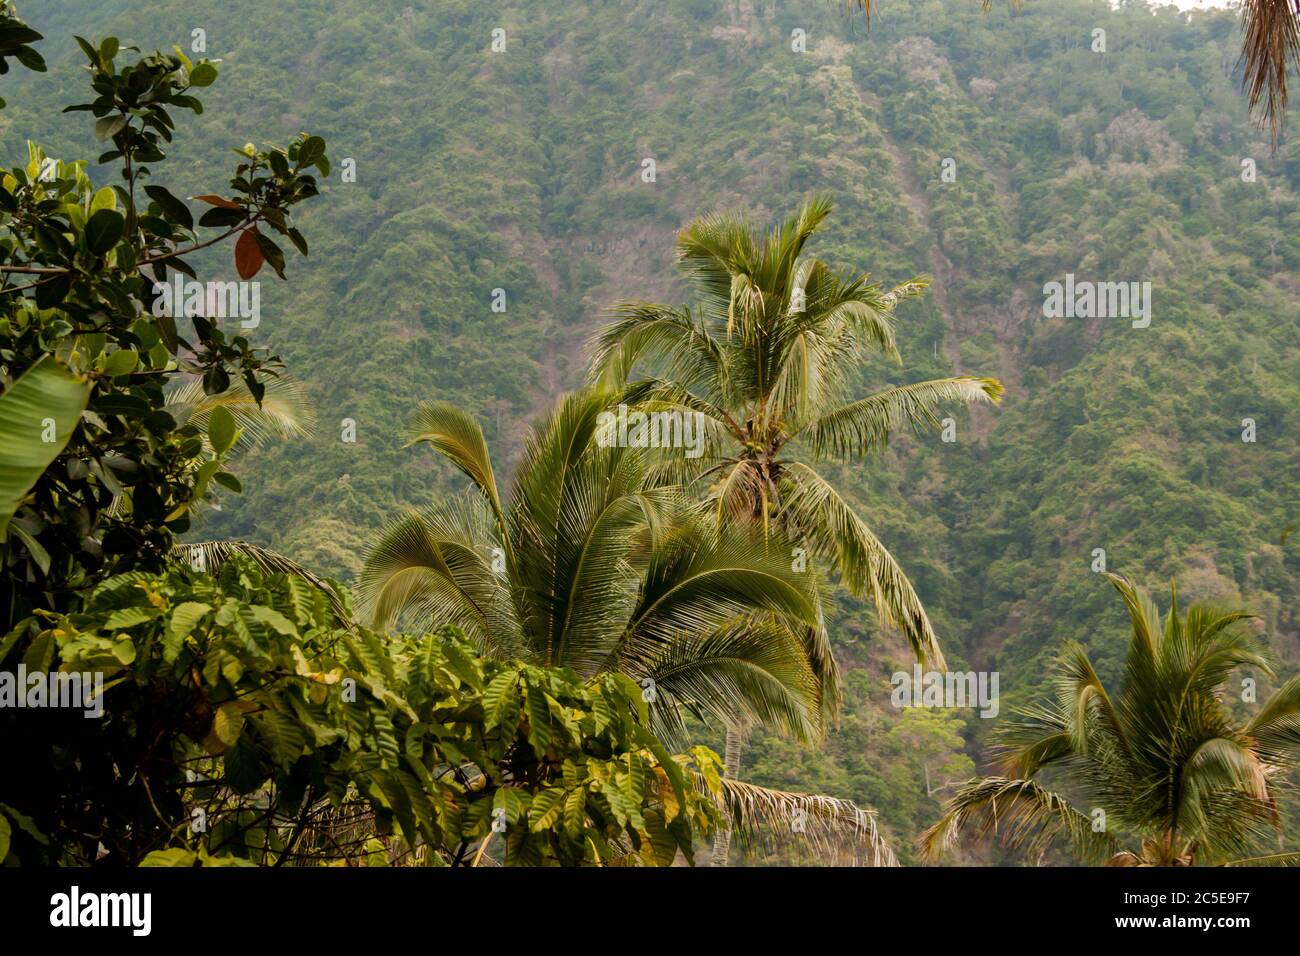 Palm trees and tropical plants creating the beautiful Bali landscape Stock Photo